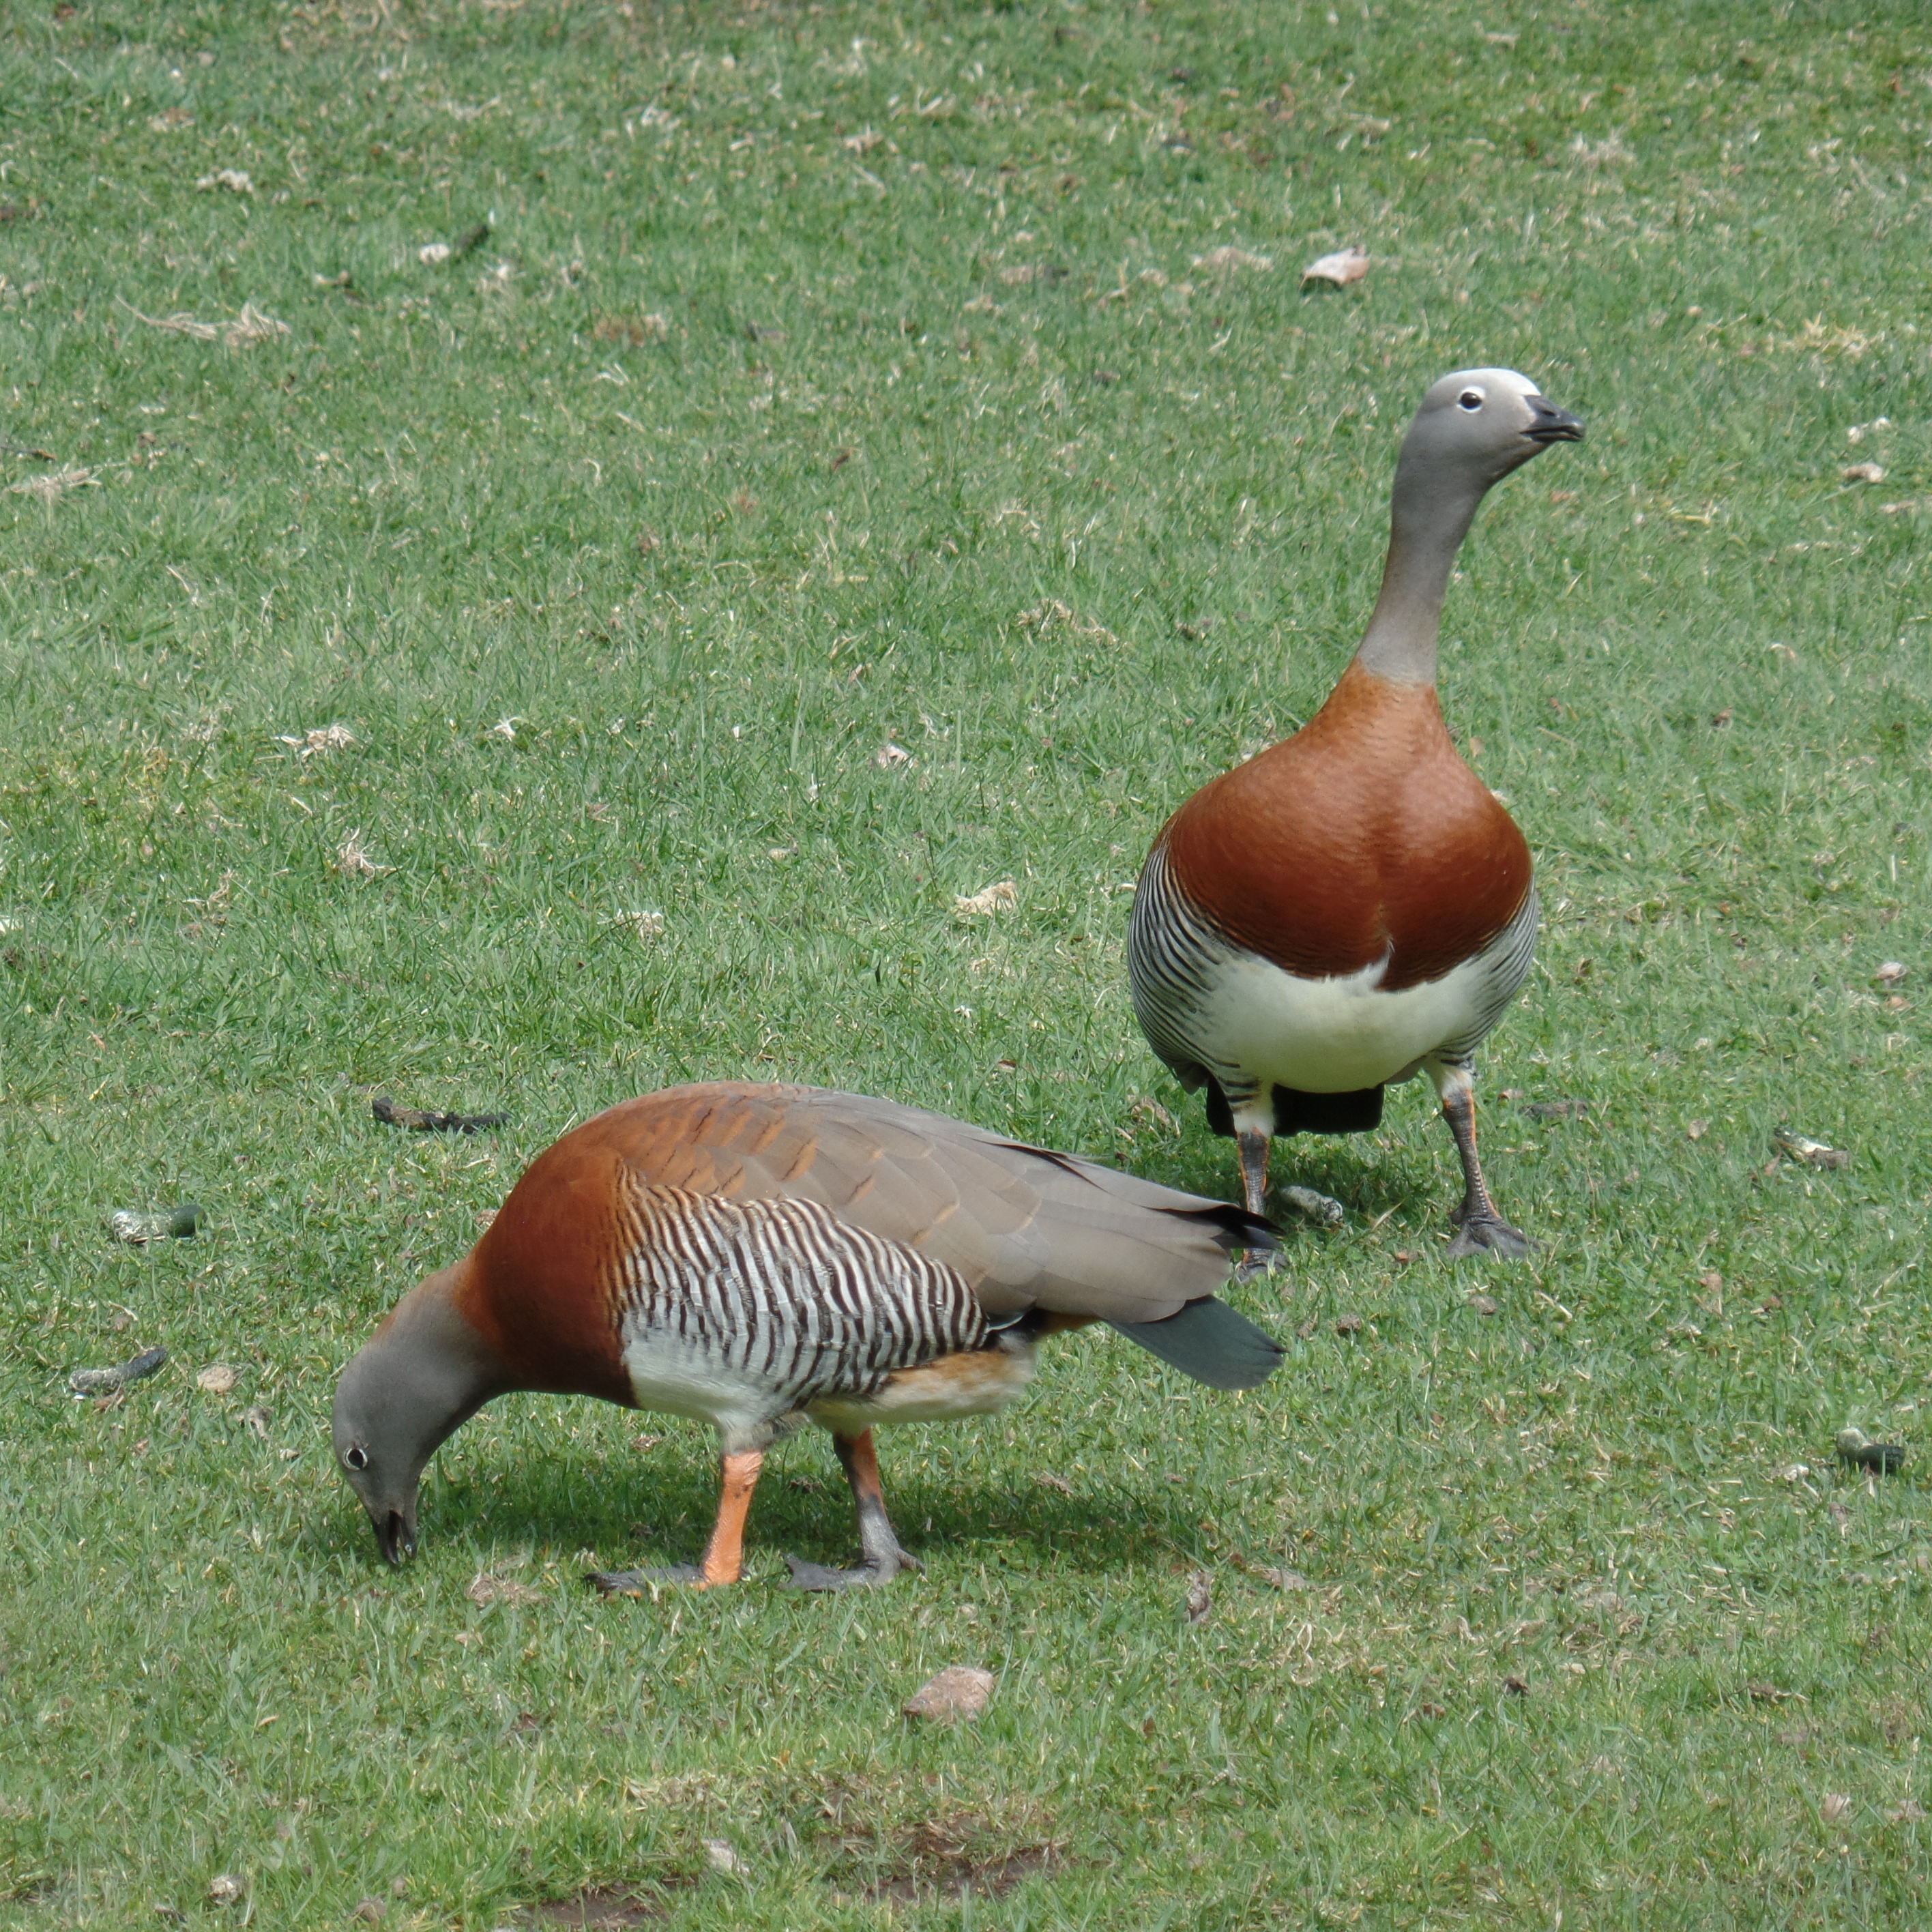 Ashy Headed Geese-common in Argentina's Lake District and Patagonia